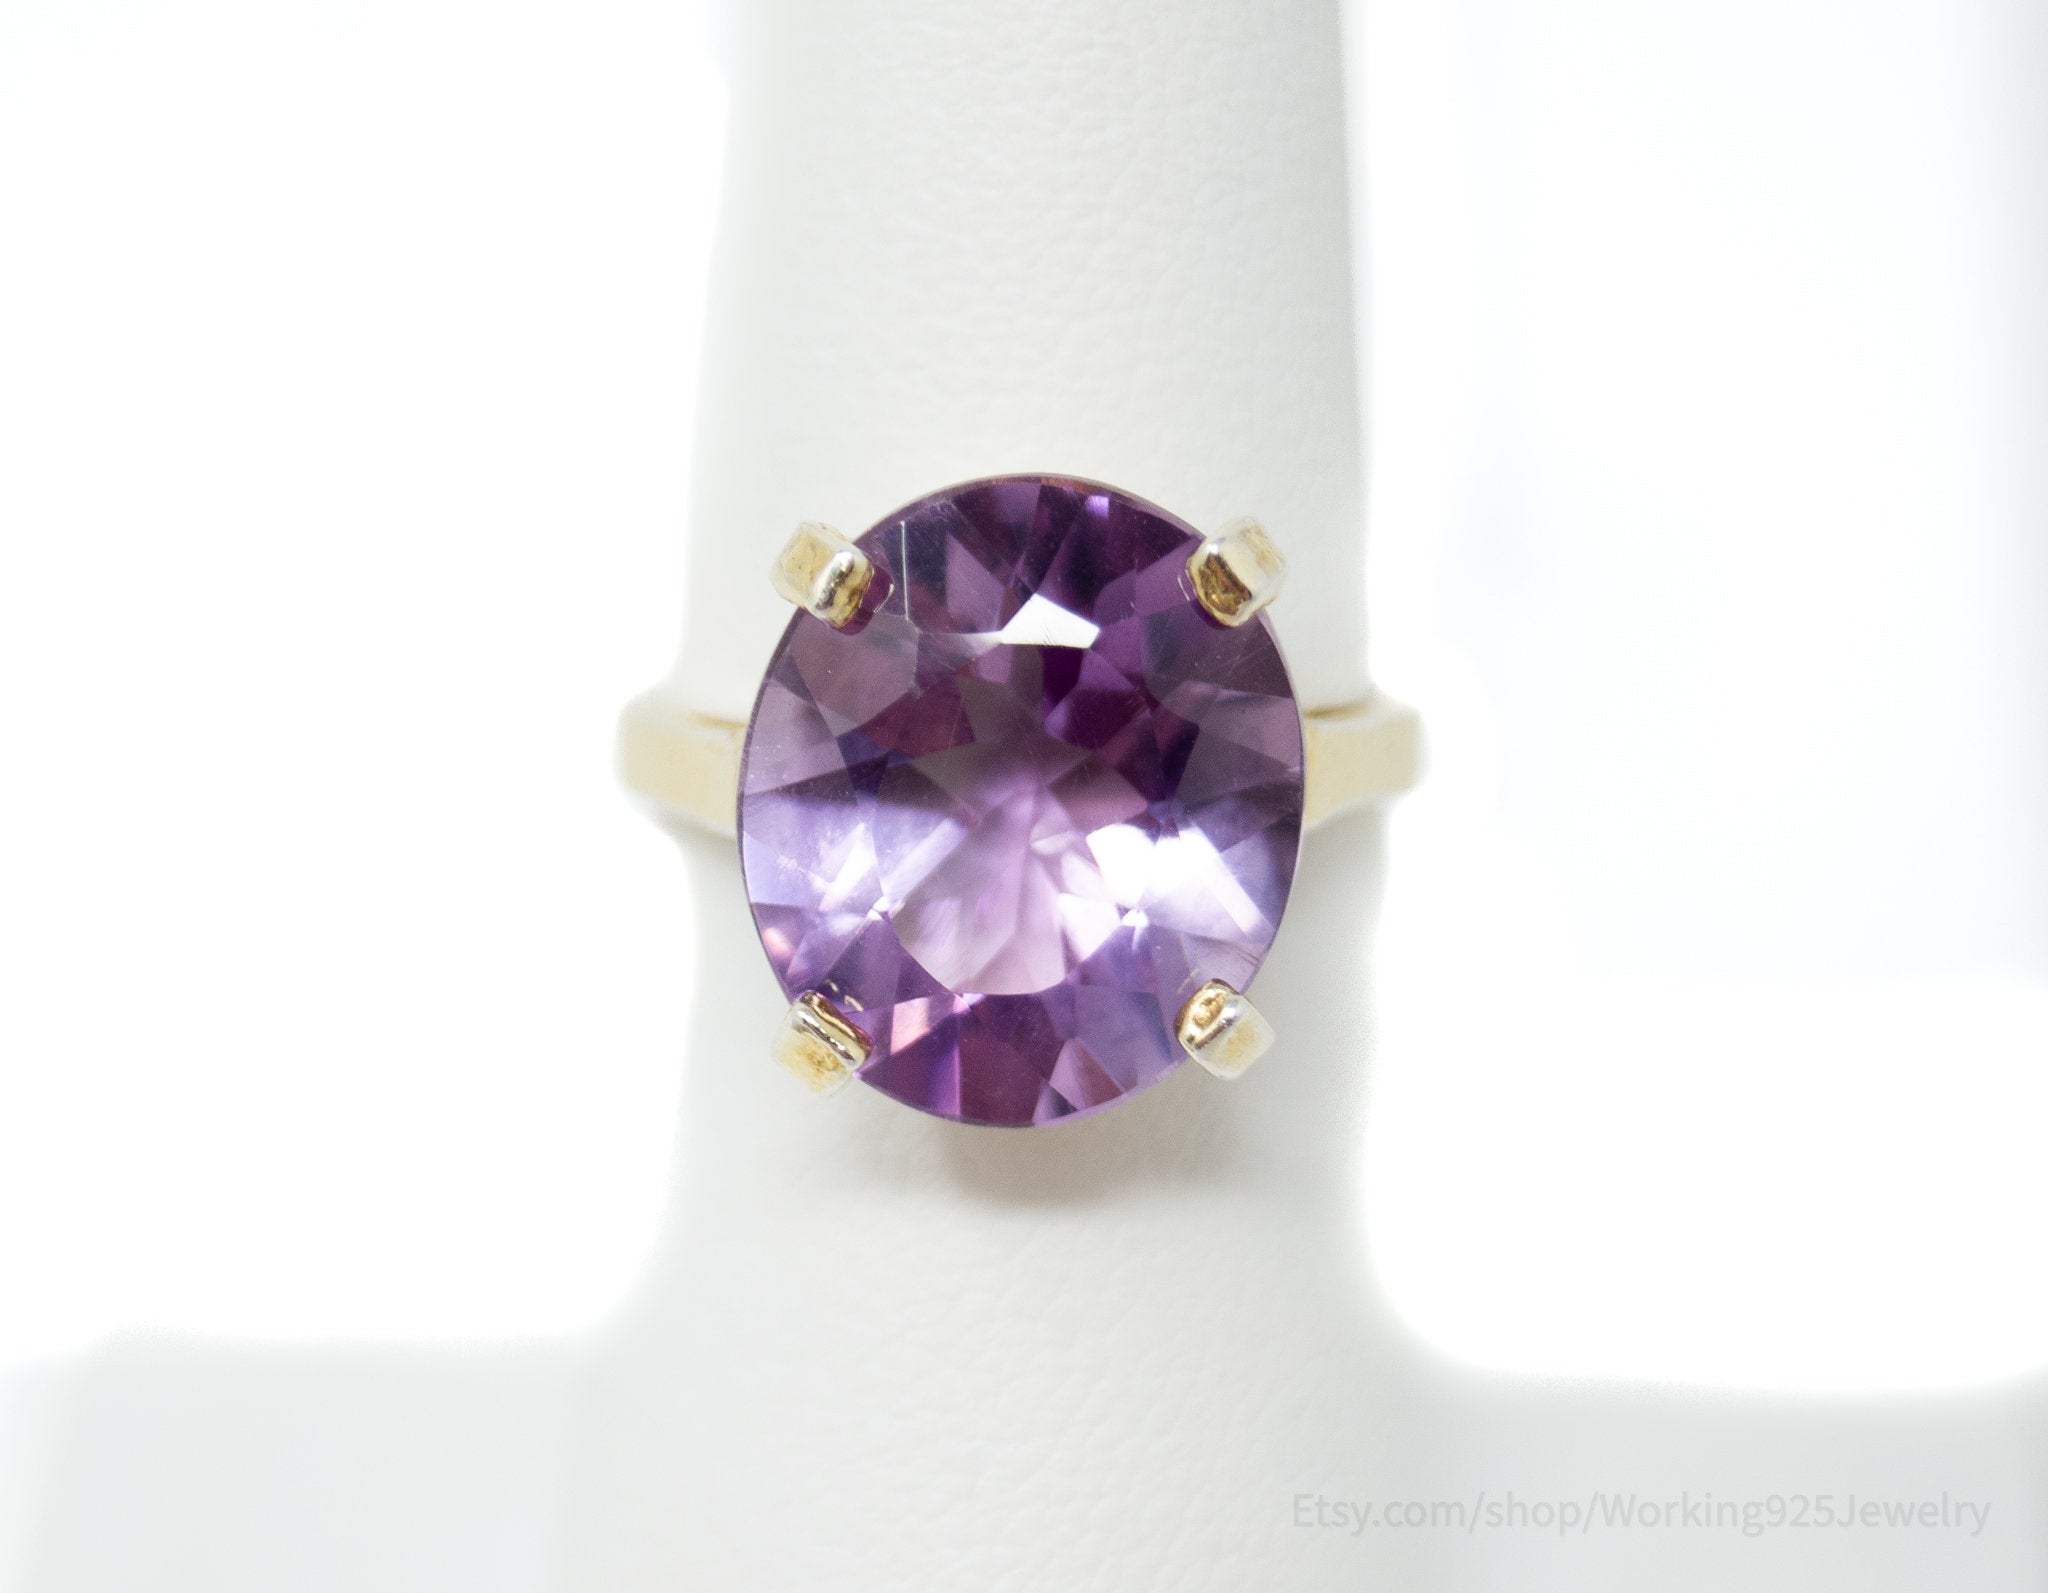 Vtg Art Deco Mid Century Style Amethyst Gold Wash Ring Sterling Silver - Size 6